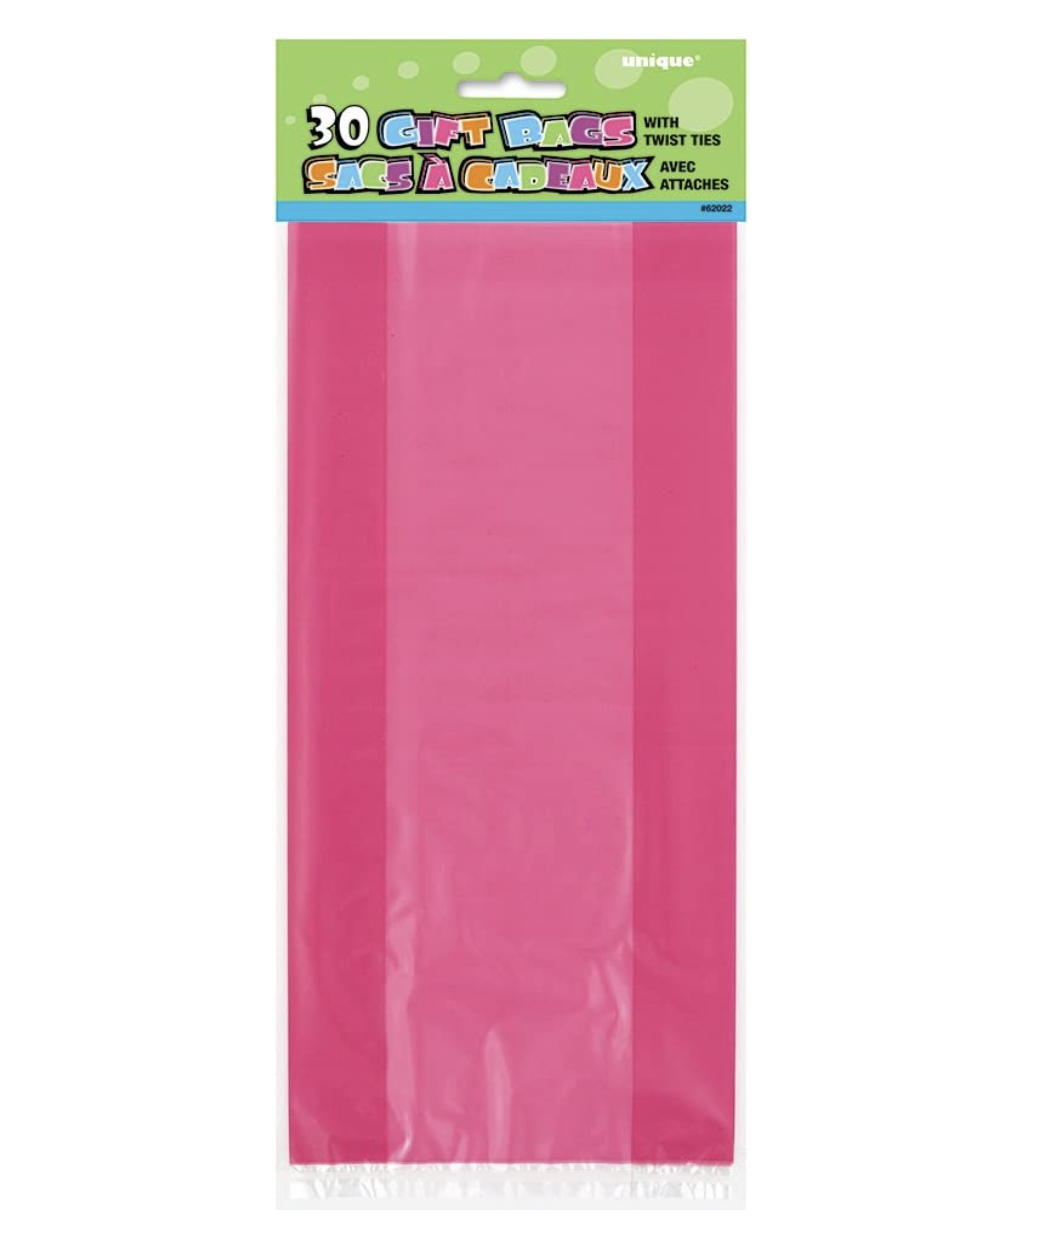 Hot pink Cellophane Bags 30ct